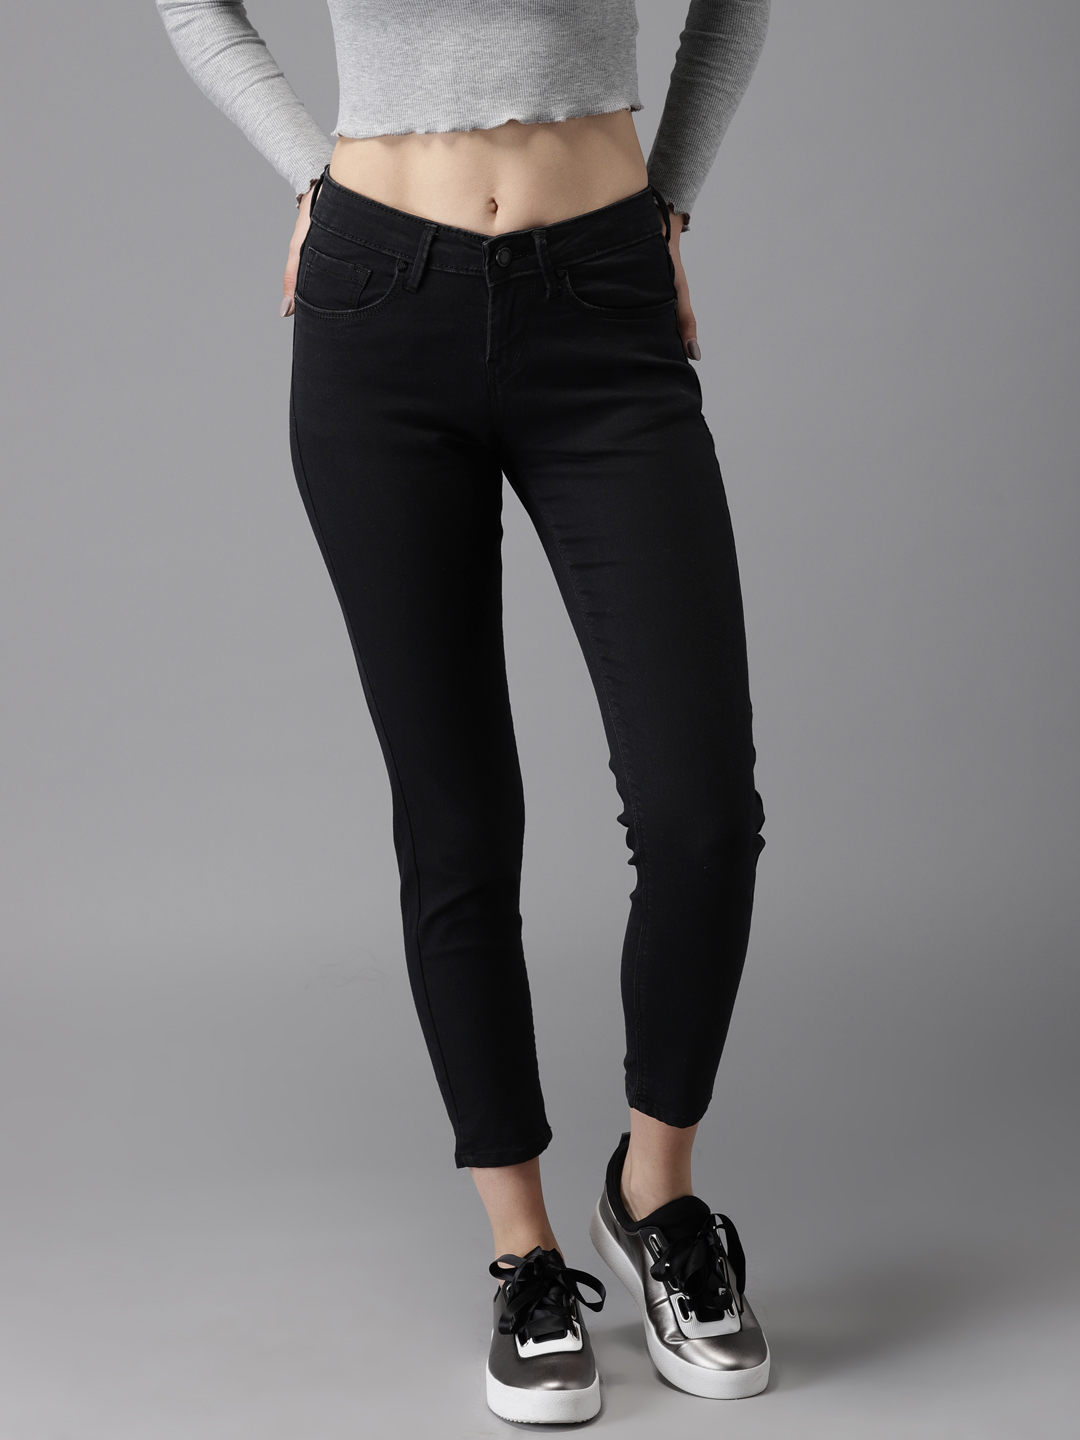 HERE&NOW Women Black Skinny Fit Mid-Rise Ankle Length Clean Look  Stretchable Jeans Price in India, Full Specifications & Offers |  DTashion.com